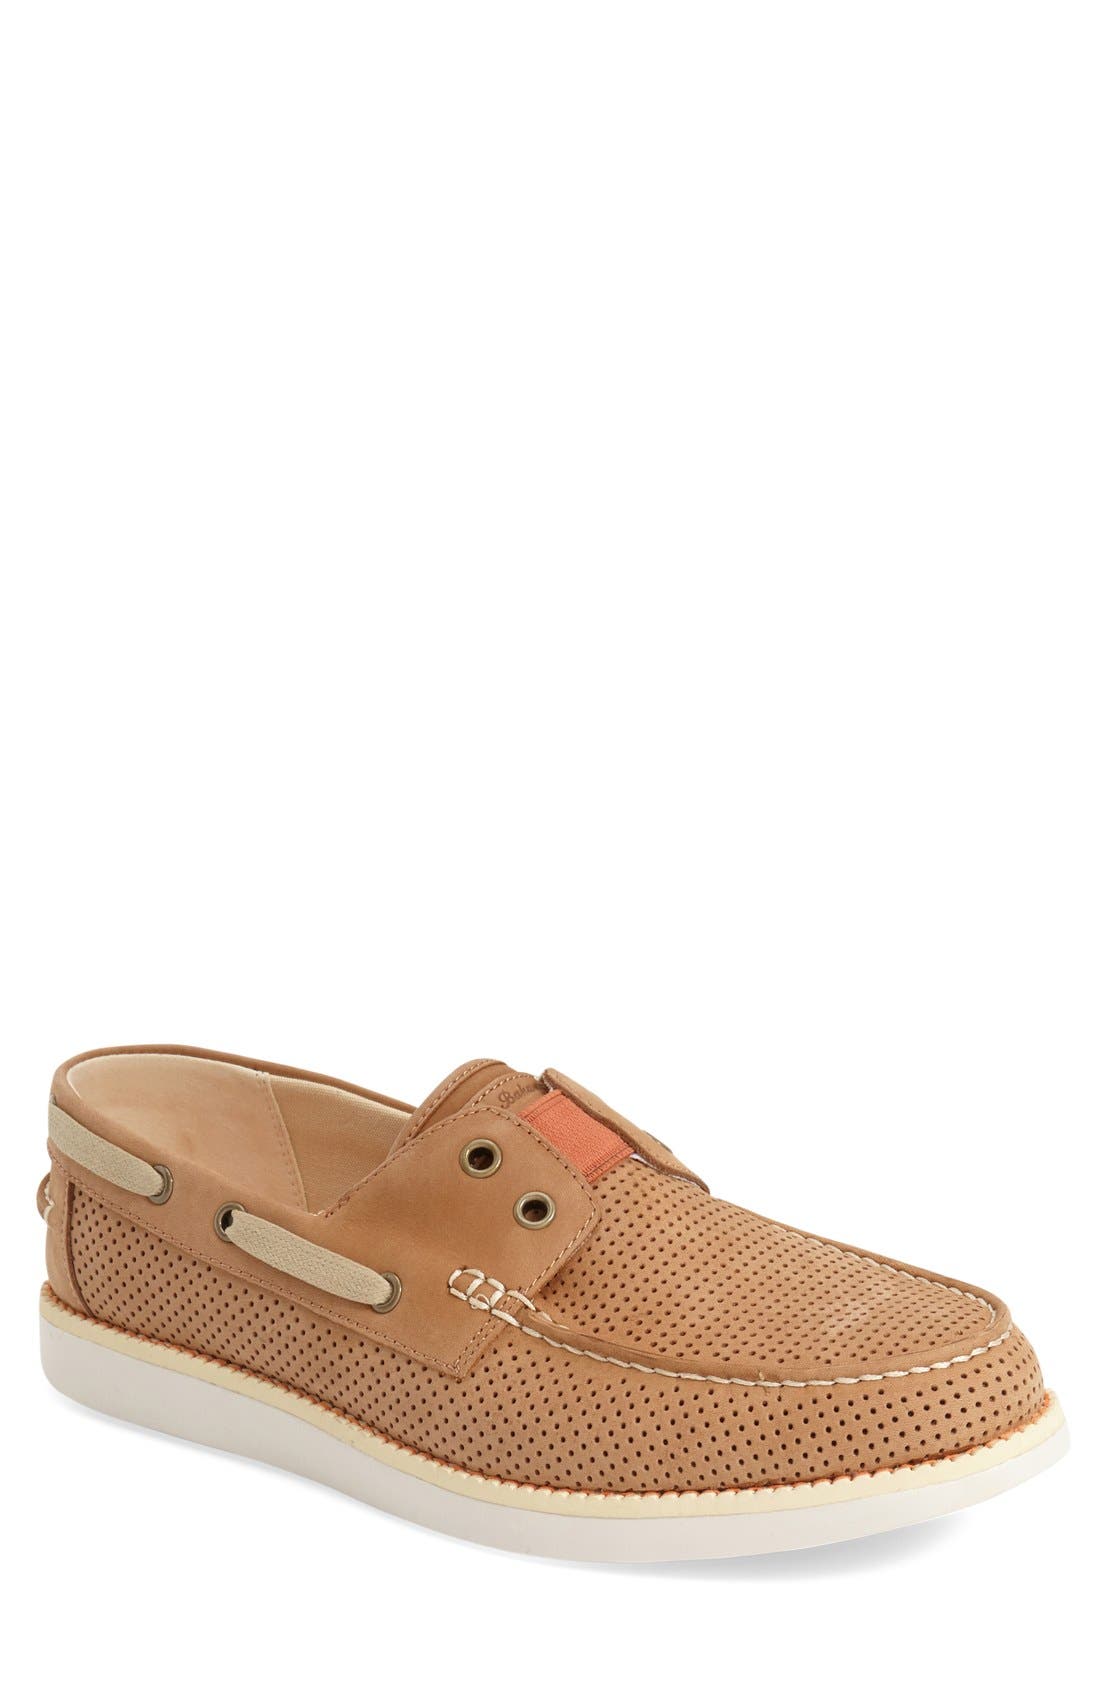 tommy bahama tennis shoes